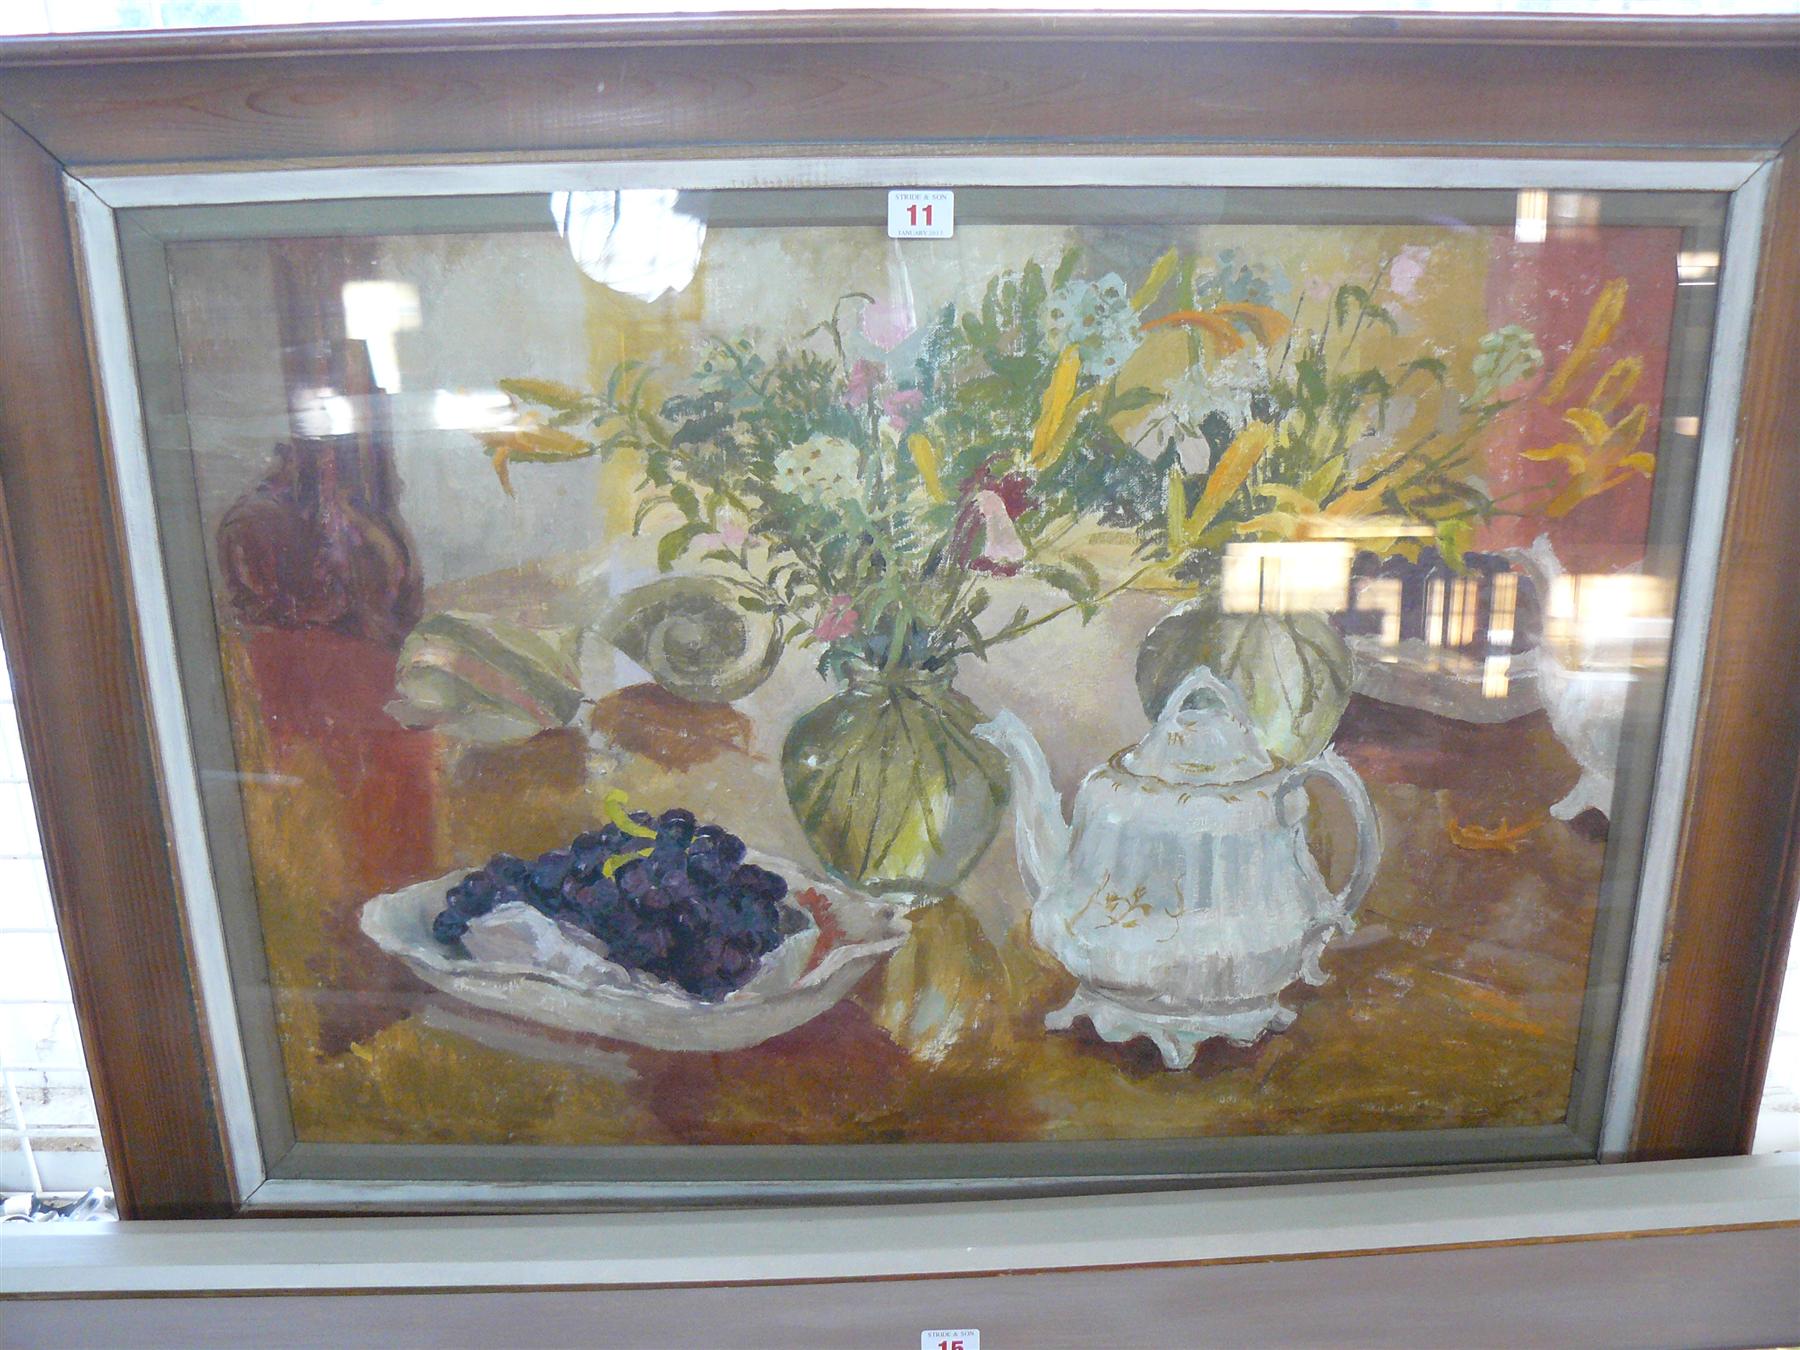 Gillian Whaite, still life of grapes, teapot and flowers on a sideboard, inscribed and dated 1.8.